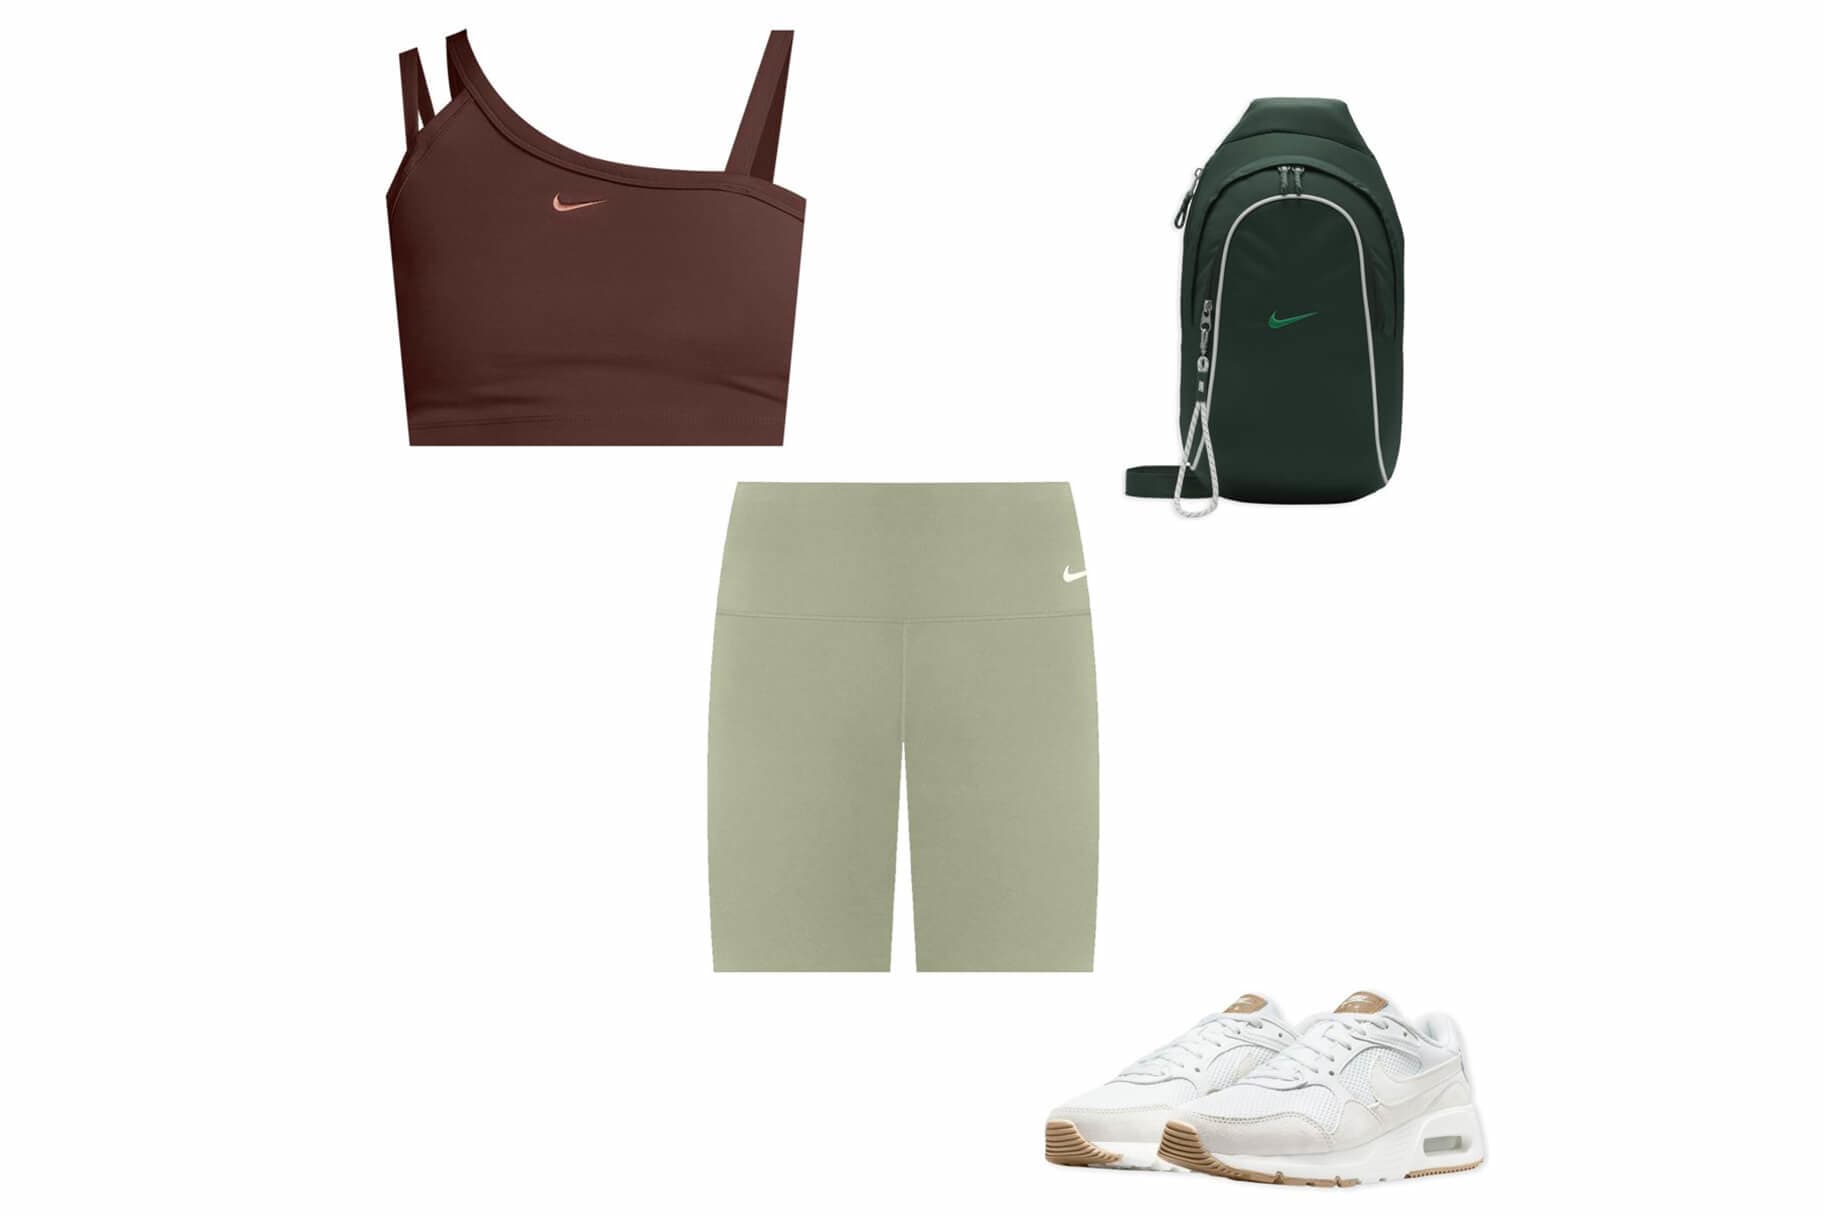 5 biker shorts outfit ideas to wear right now . Nike UK